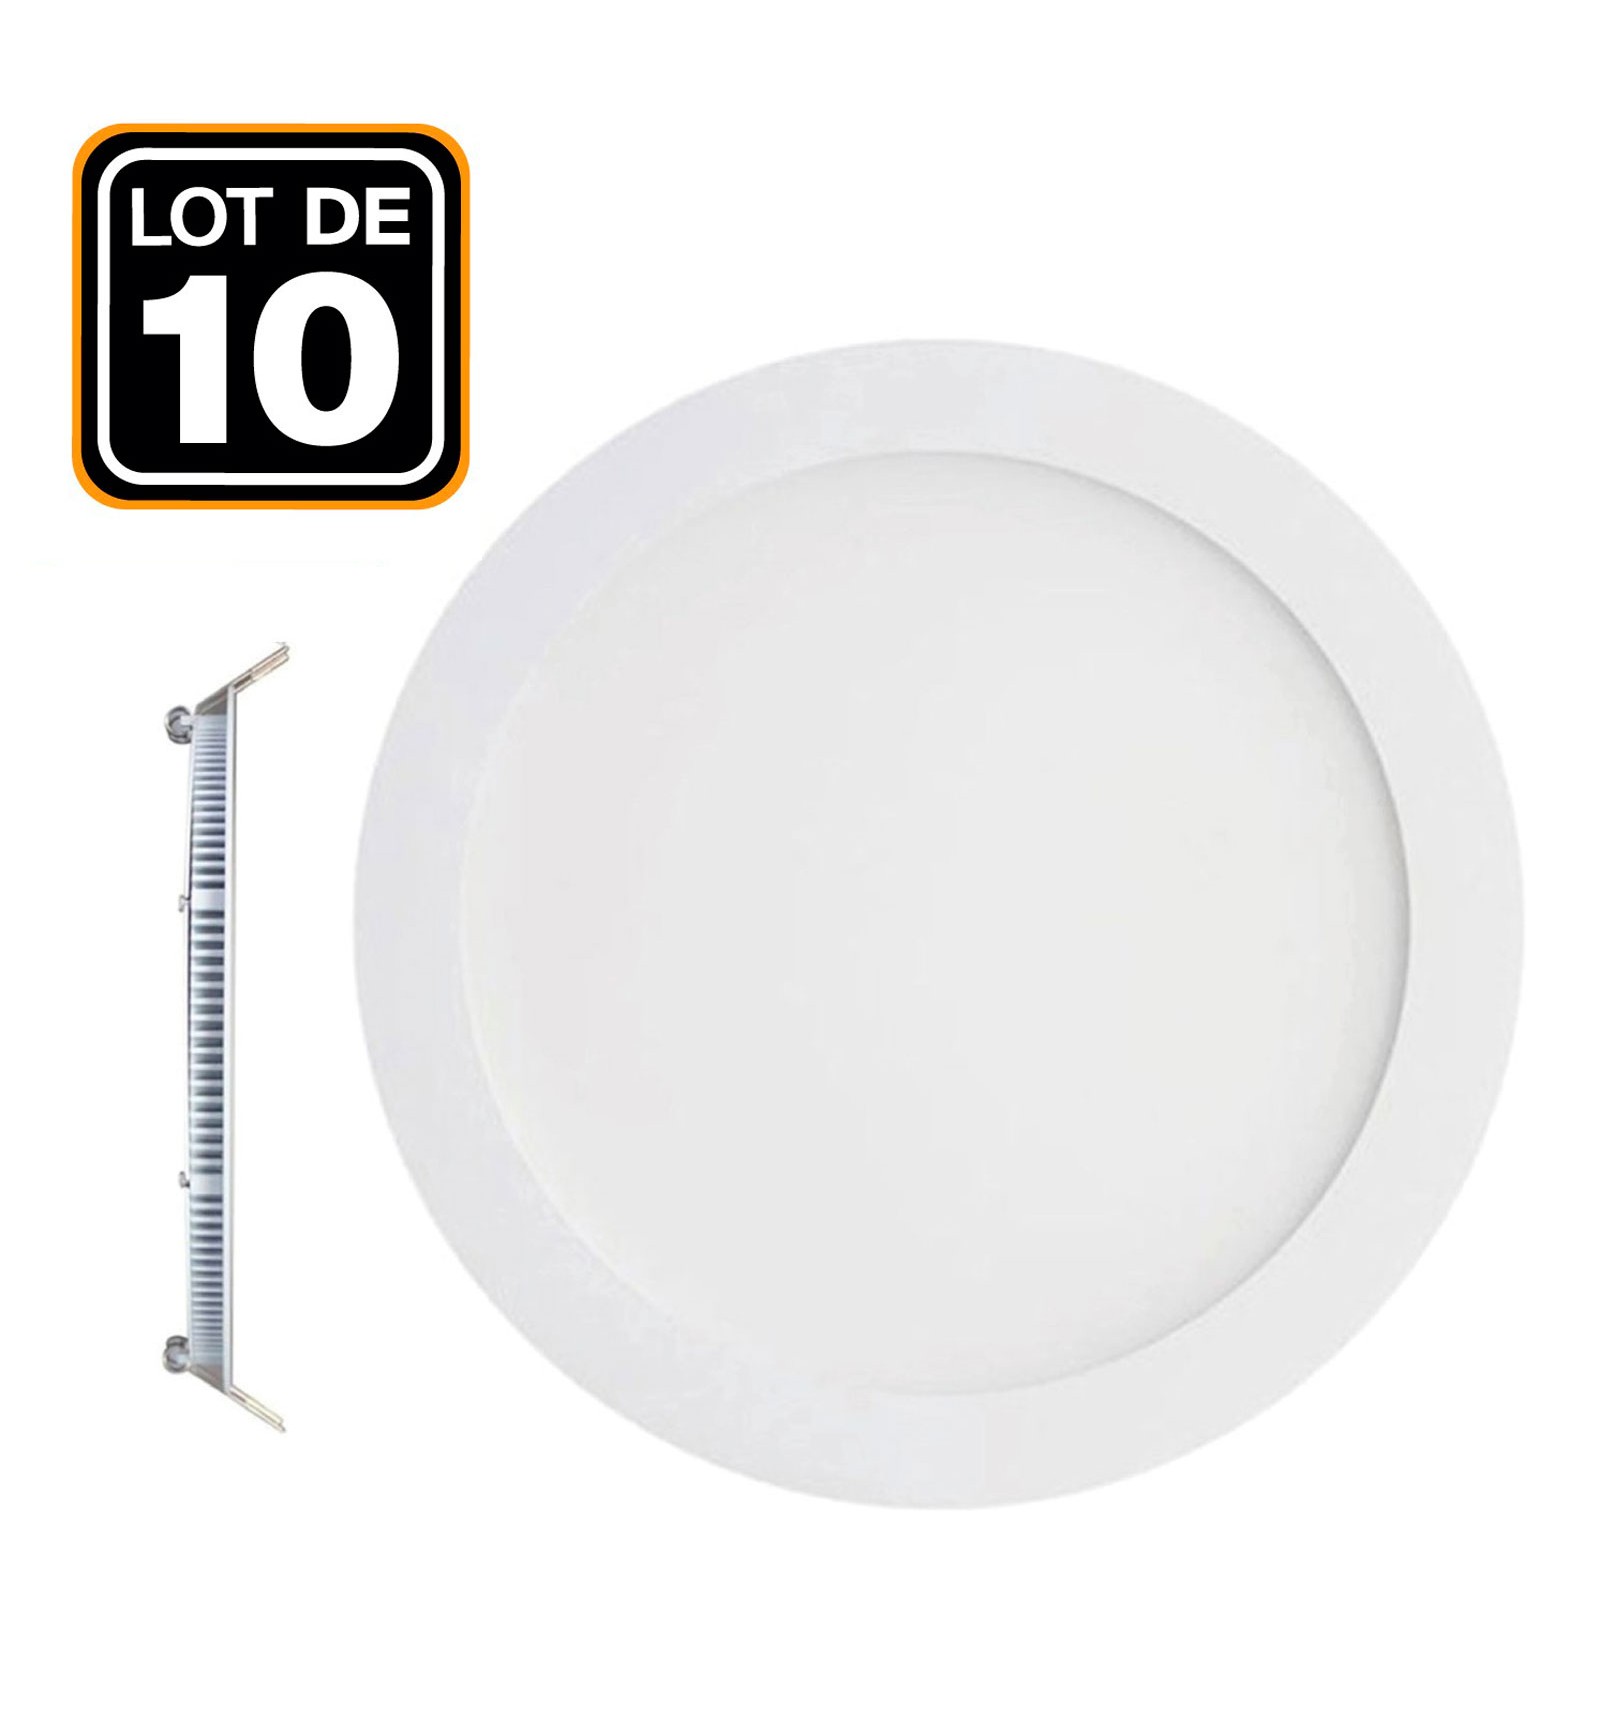 Lot of 10 Spots slide LED Downlight Panel extra flat 6W cold white